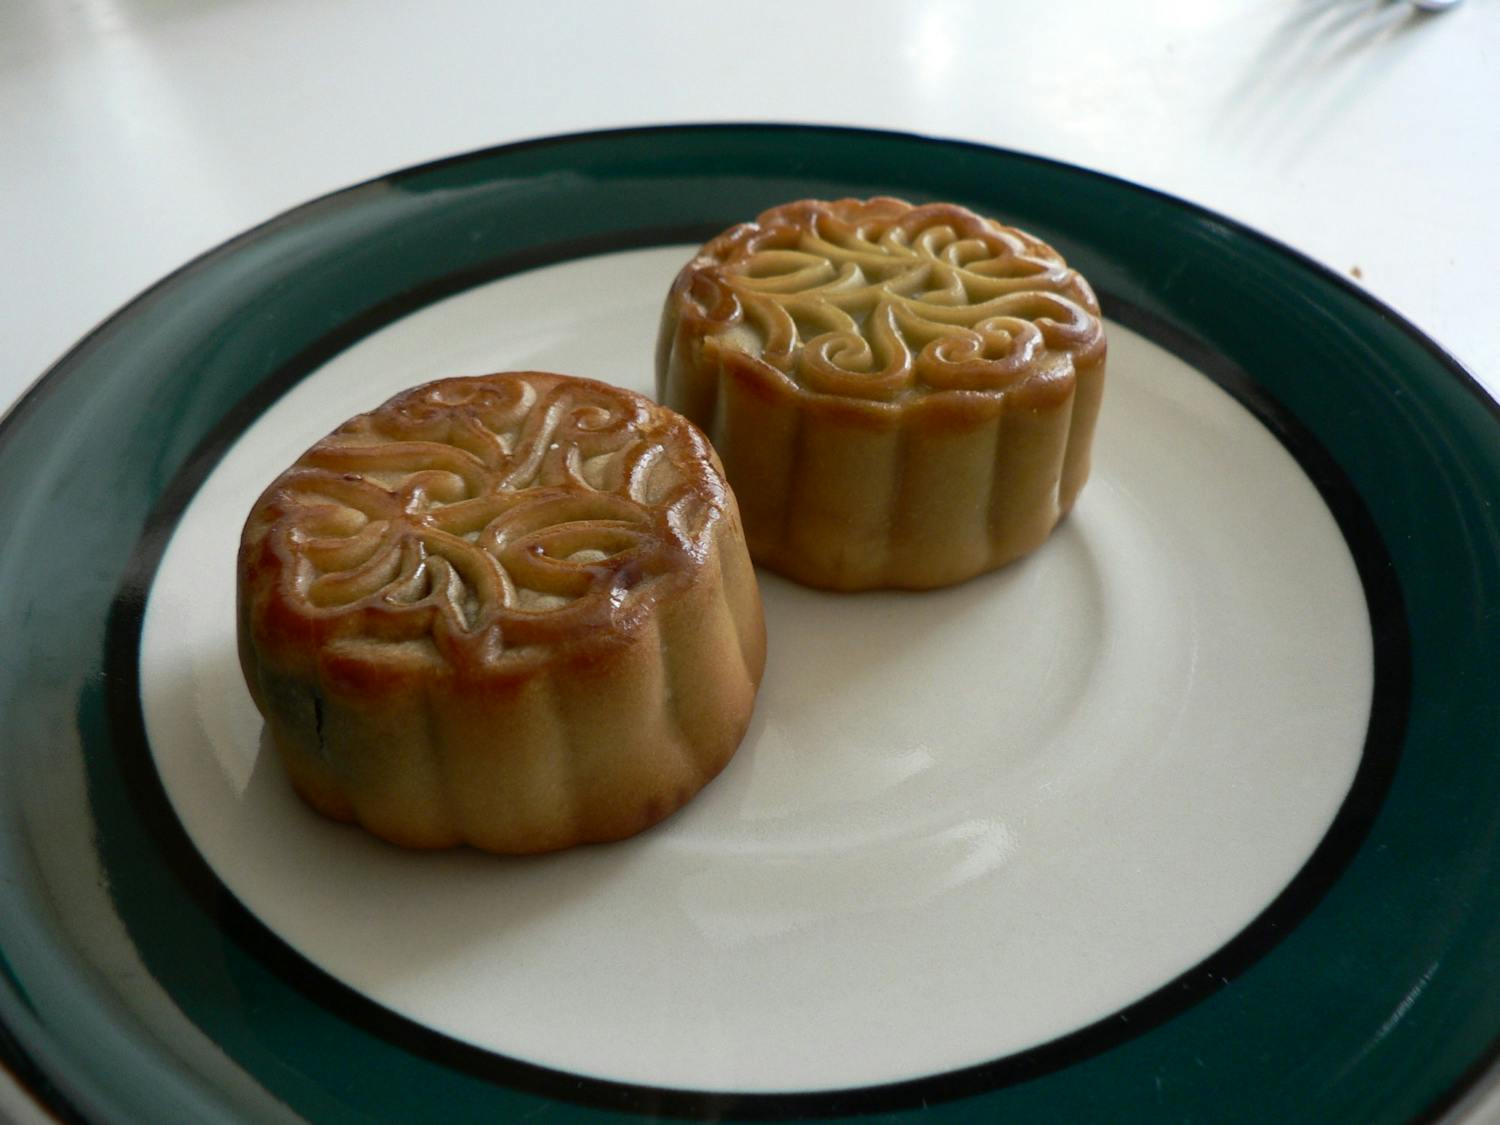 Two mooncakes on a plate.